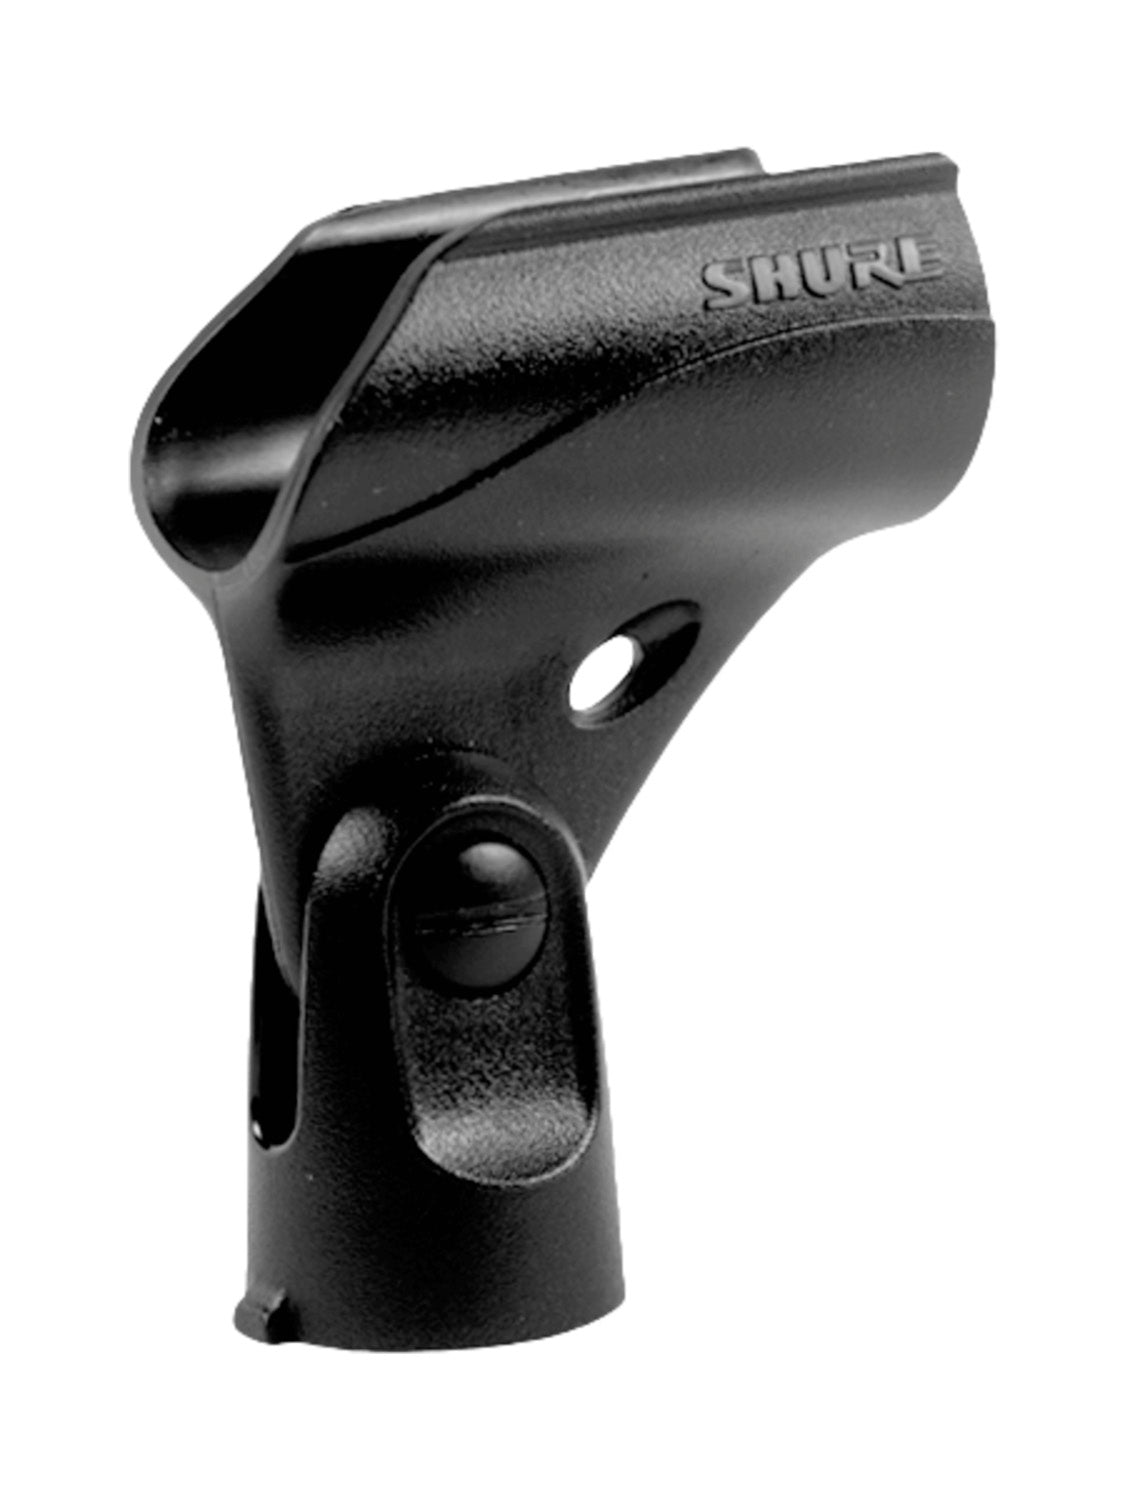 B-Stock: Shure A25D, Mic Clip Break Resistant Common Mic Stand Adapter for Shure Handheld Mics by Shure